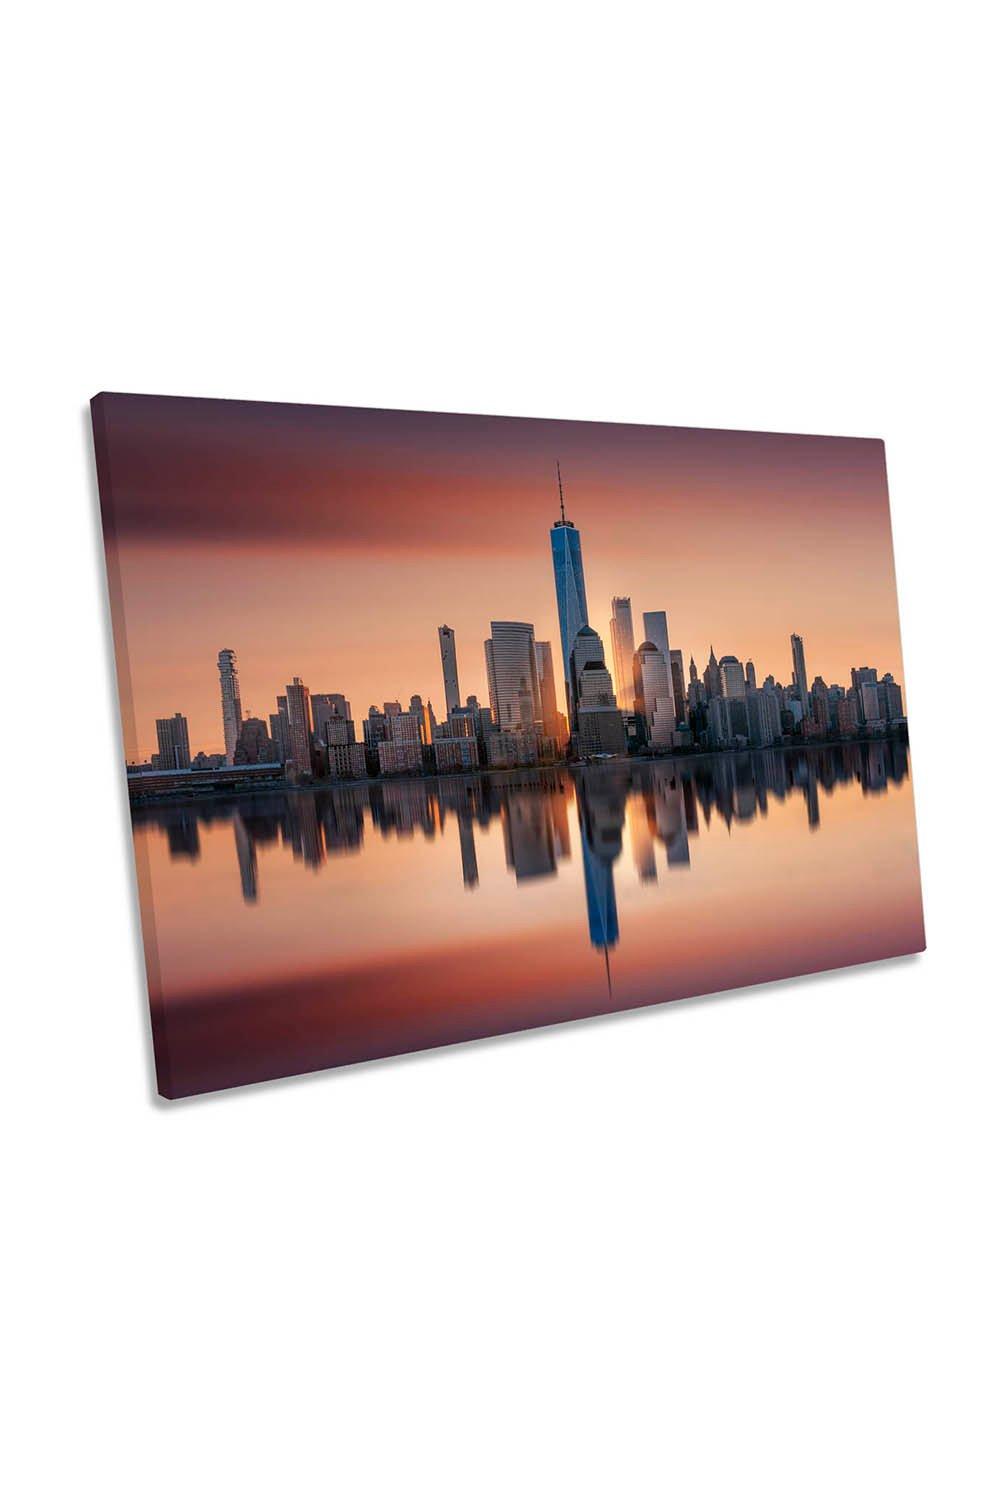 Unforgettable Sunset New York City Canvas Wall Art Picture Print